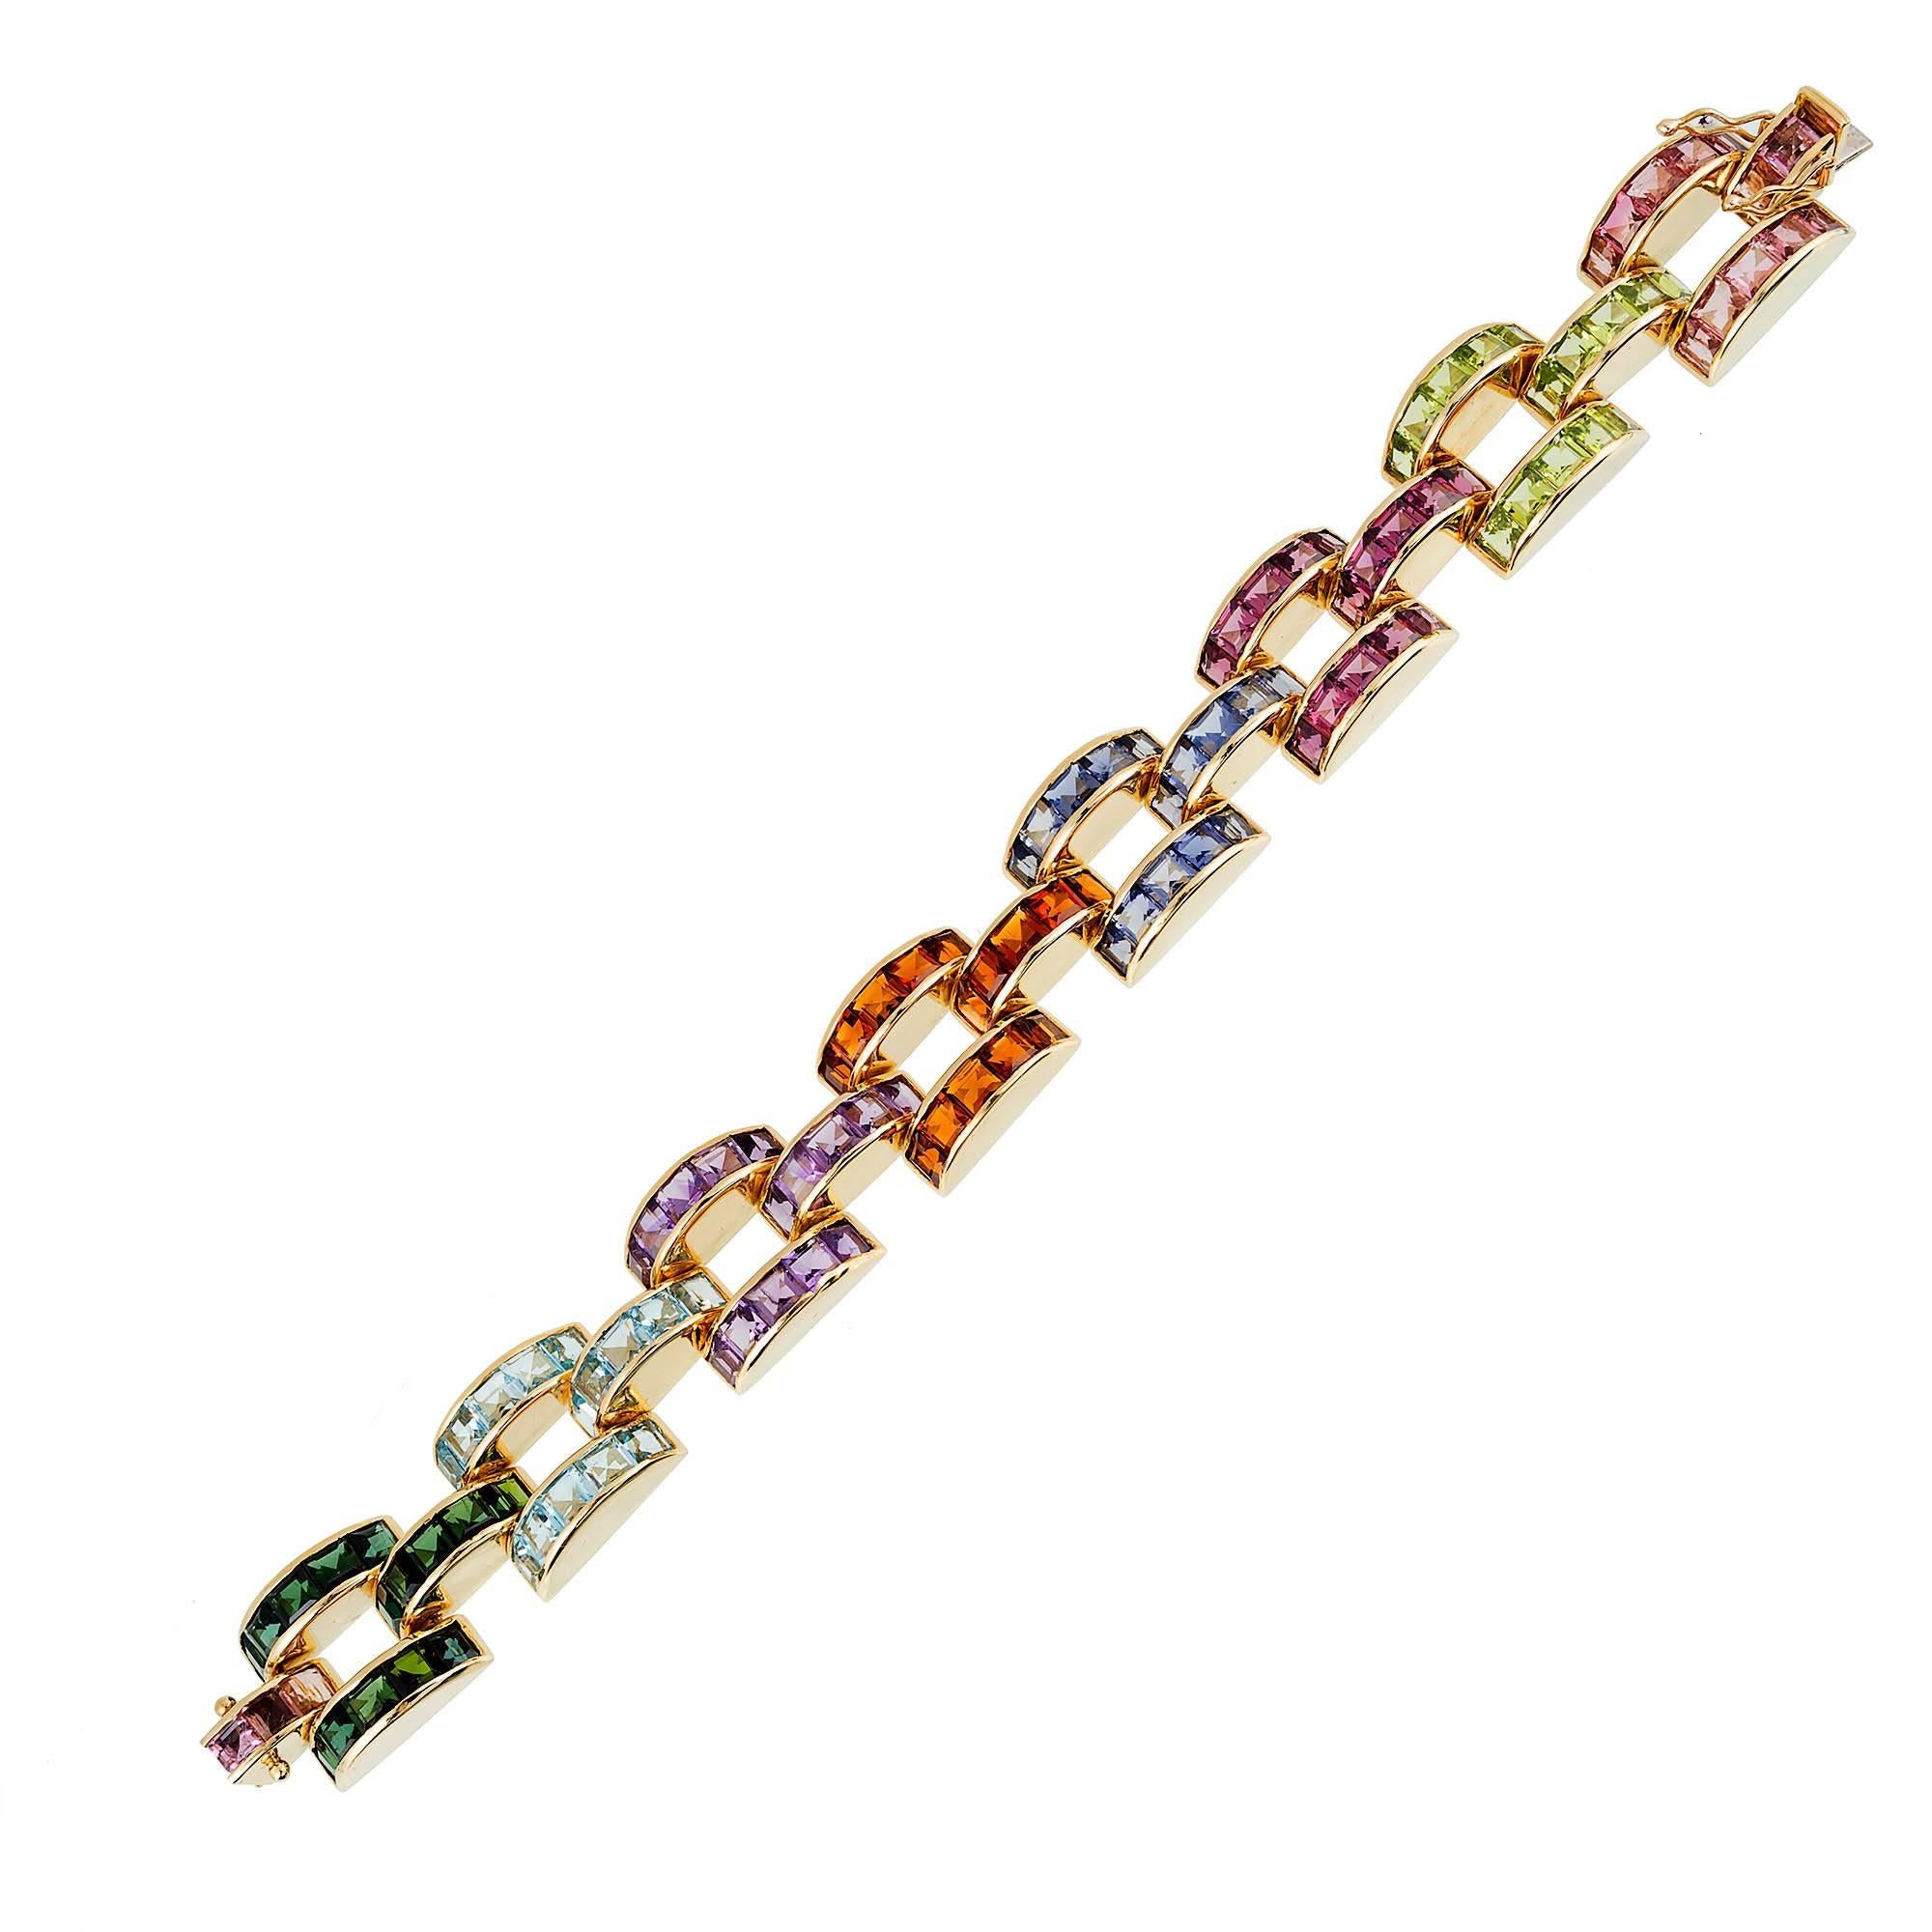 Tourmaline Topaz Amethyst Peridot Citrine Lolite Gold Link Bracelet In Good Condition For Sale In Stamford, CT